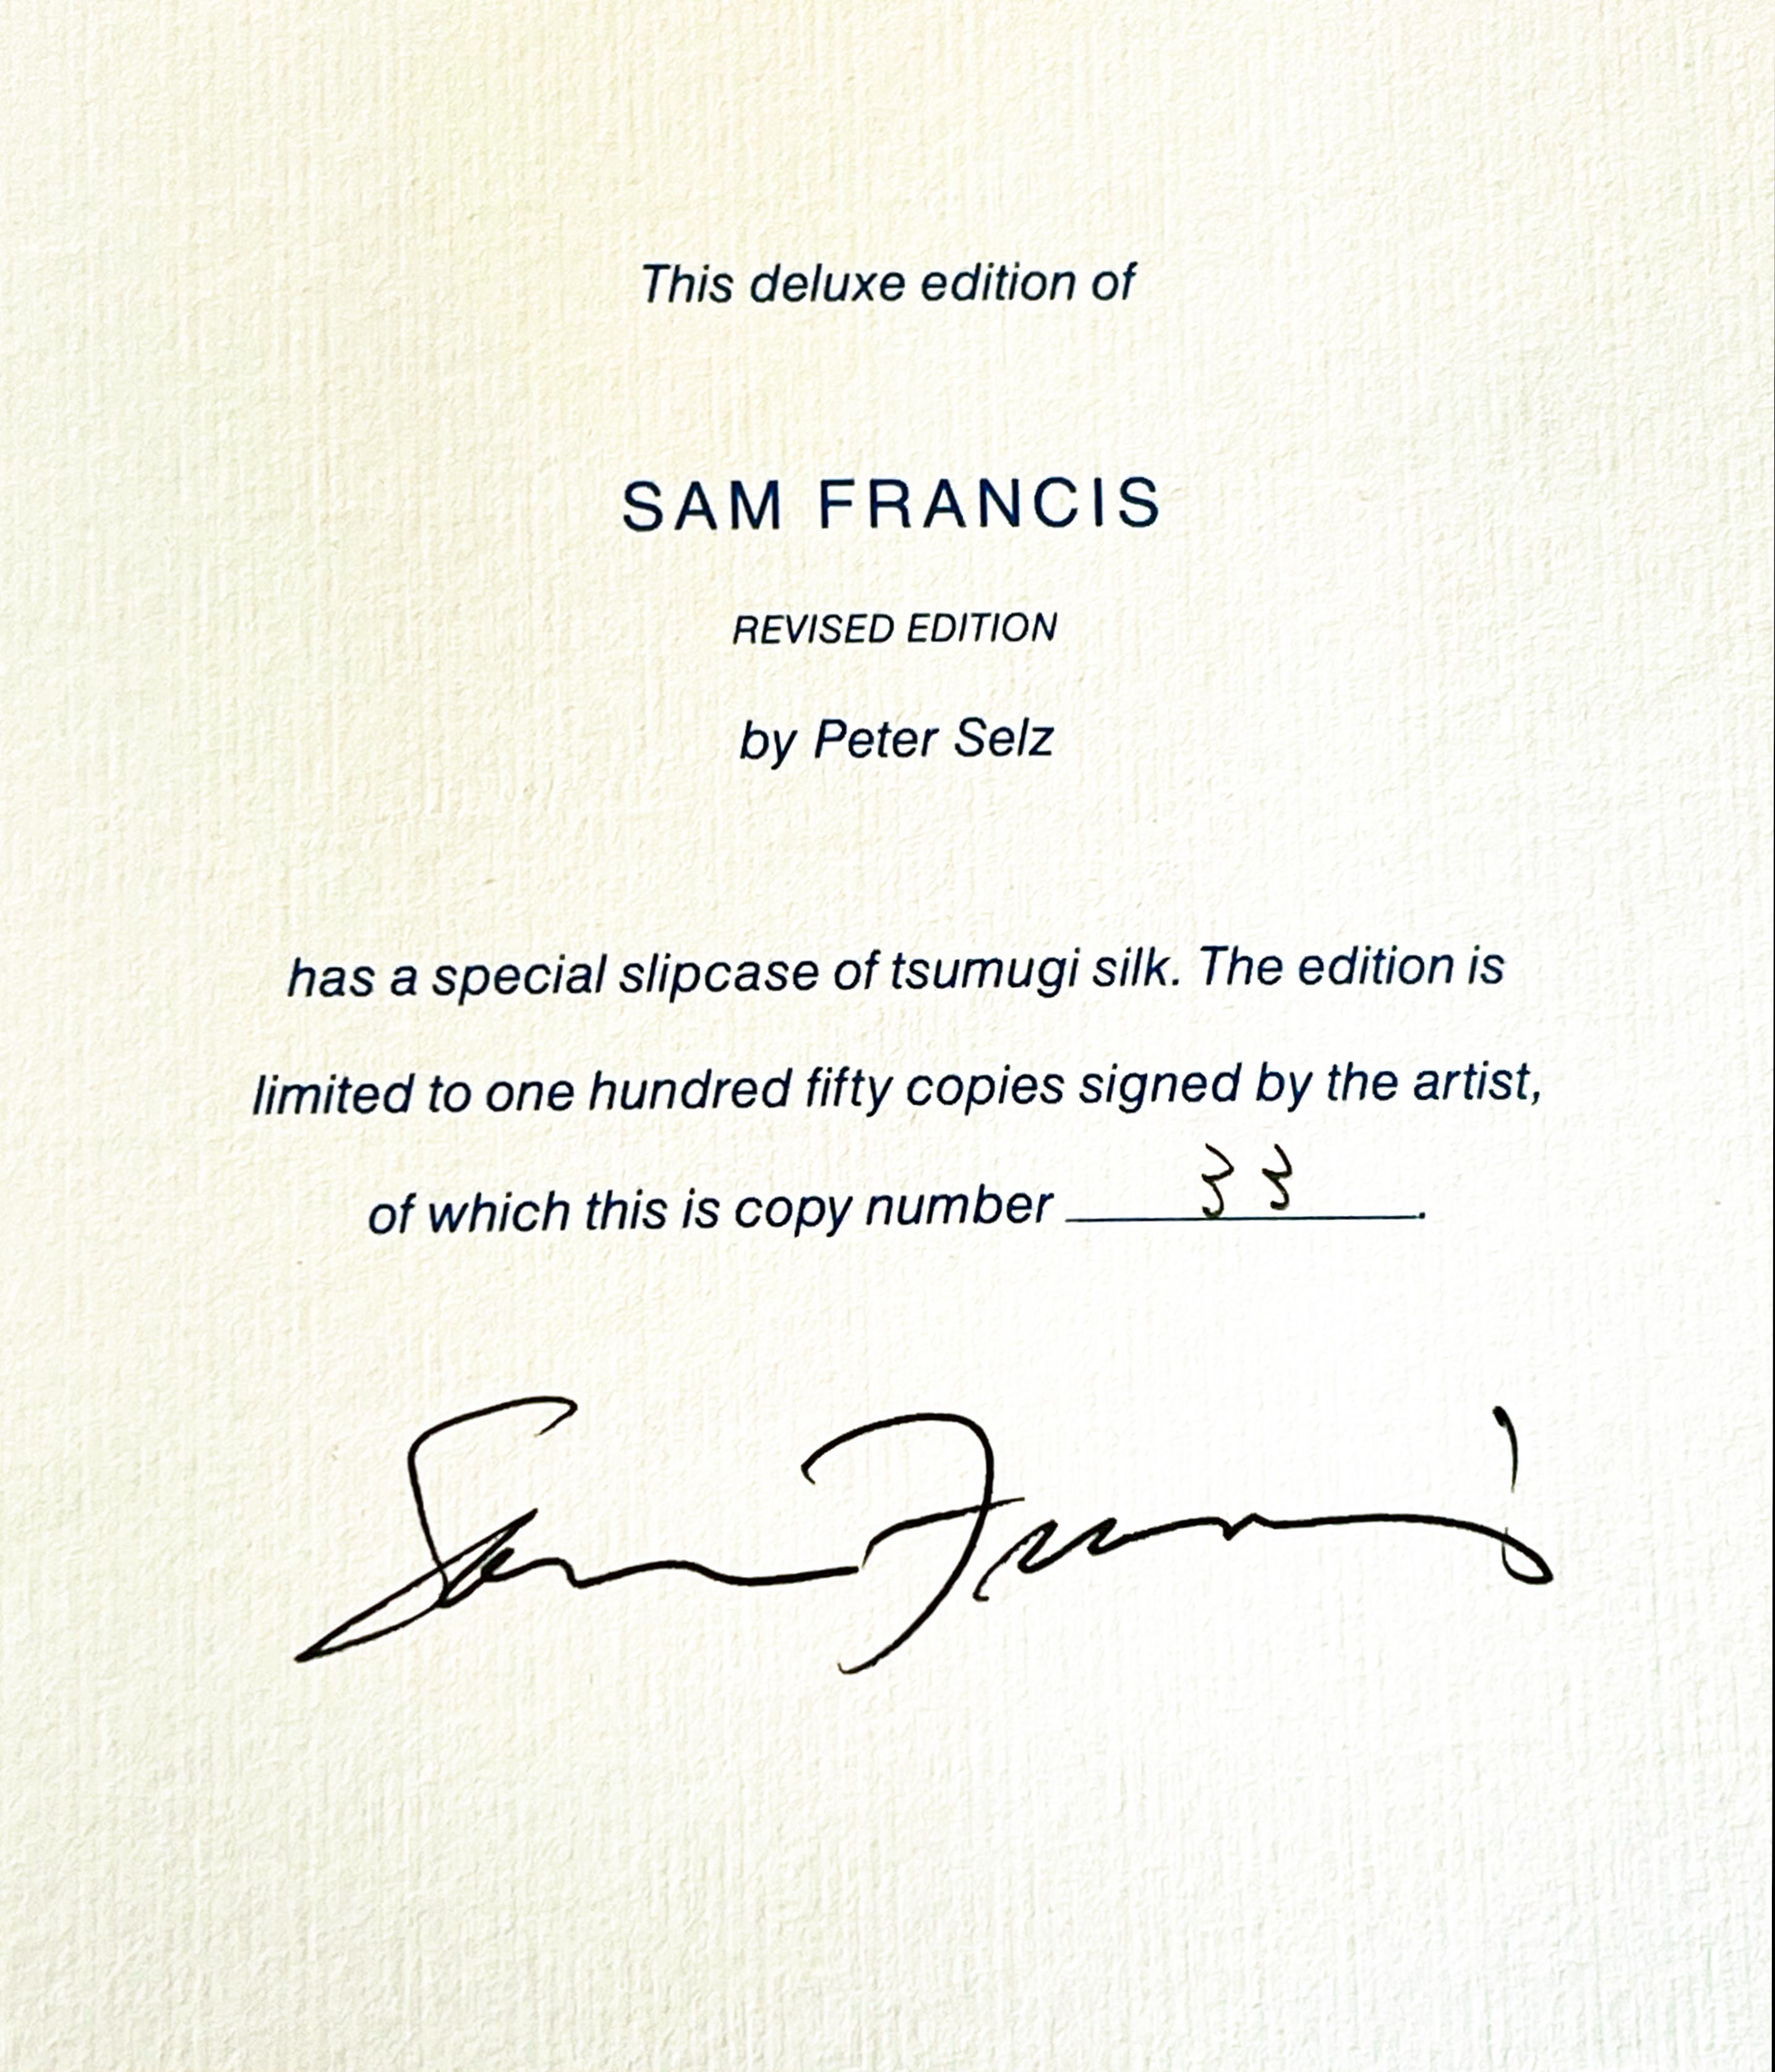 Limited Signed Deluxe Monograph with Slipcase (signed & numbered by Sam Francis) For Sale 1